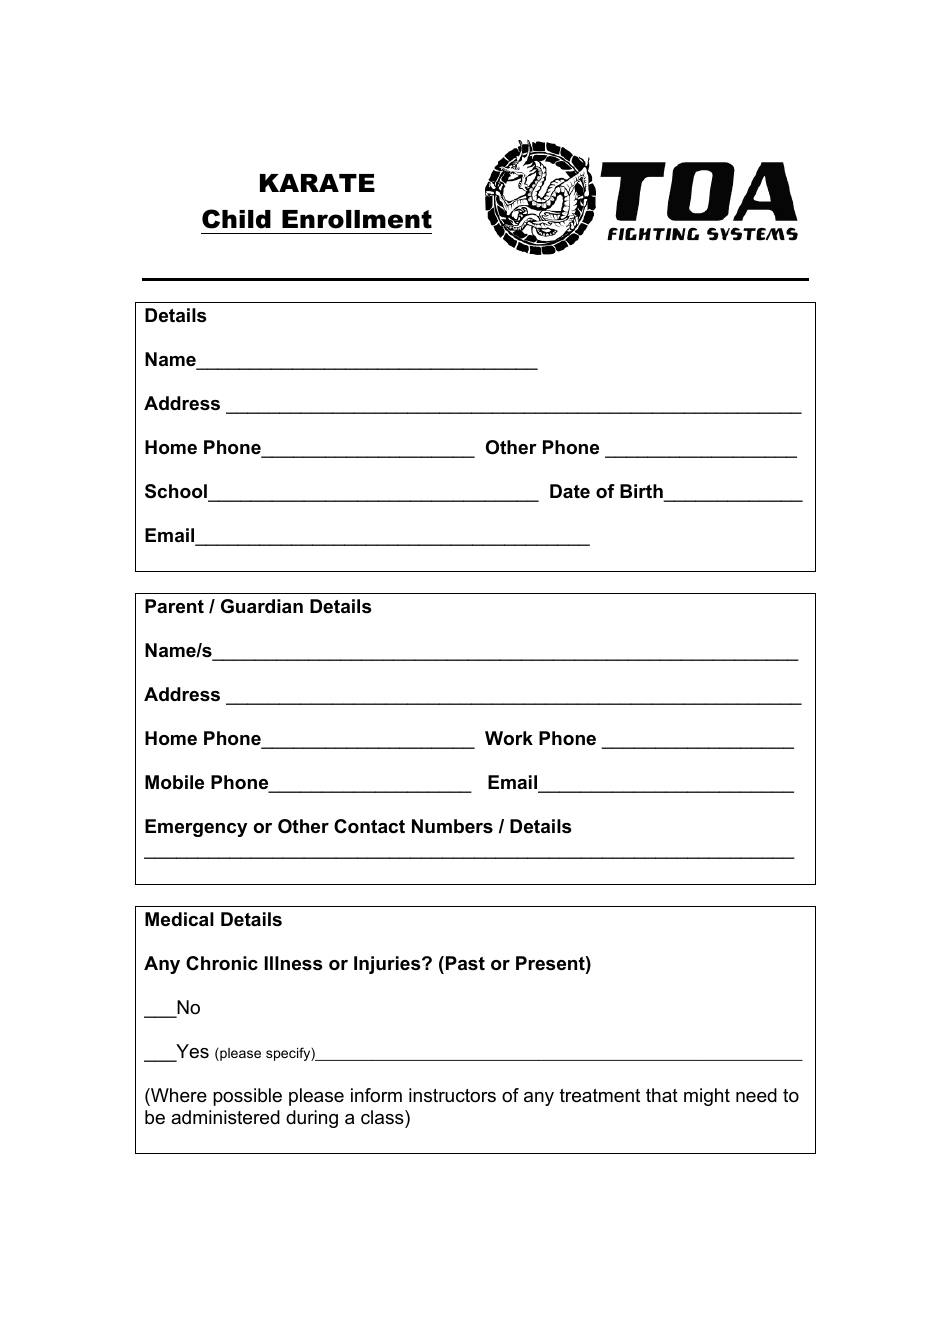 Karate Child Enrollment Form - Toa Fighting Systems, Page 1